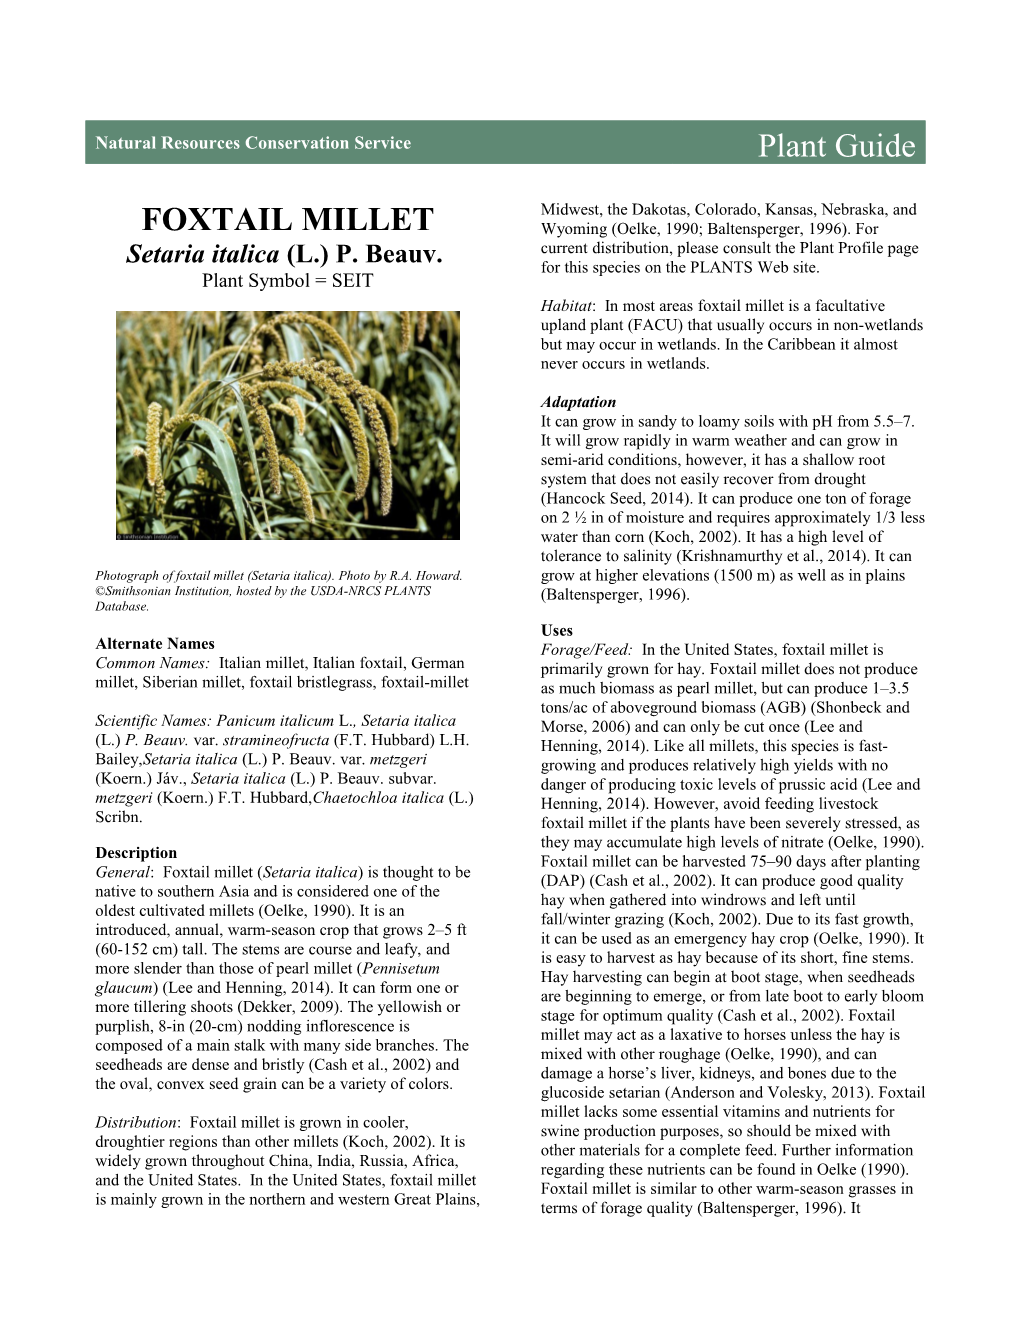 Foxtail Millet (Setaria Italica) Plant Guide